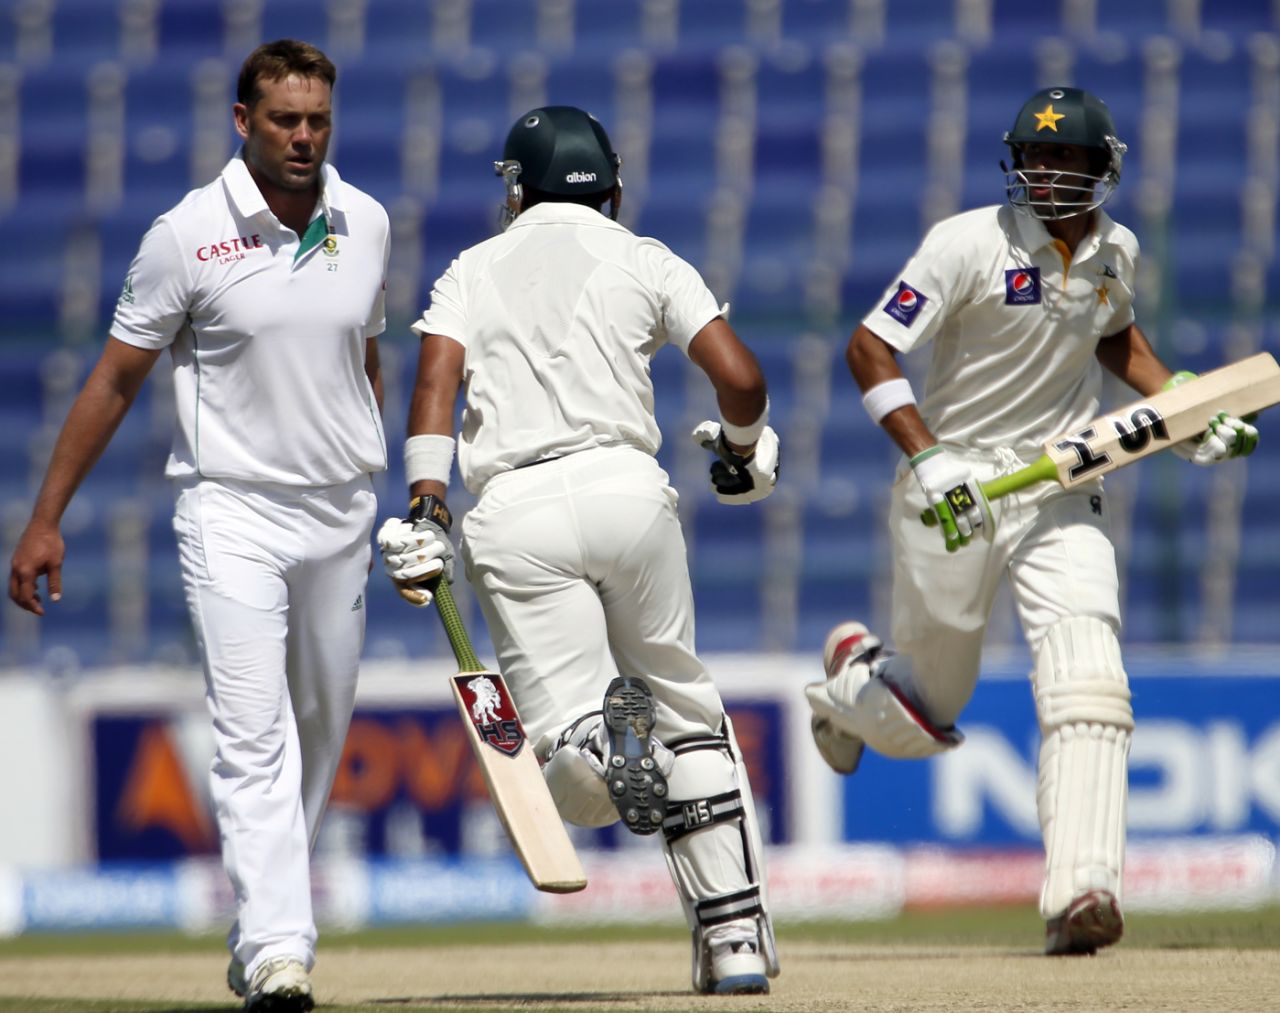 Jacques Kallis walks back to his mark while Khurram Manzoor and Shan Masood take a single, Pakistan v South Africa, 1st Test, Abu Dhabi, 2nd day, October 15, 2013